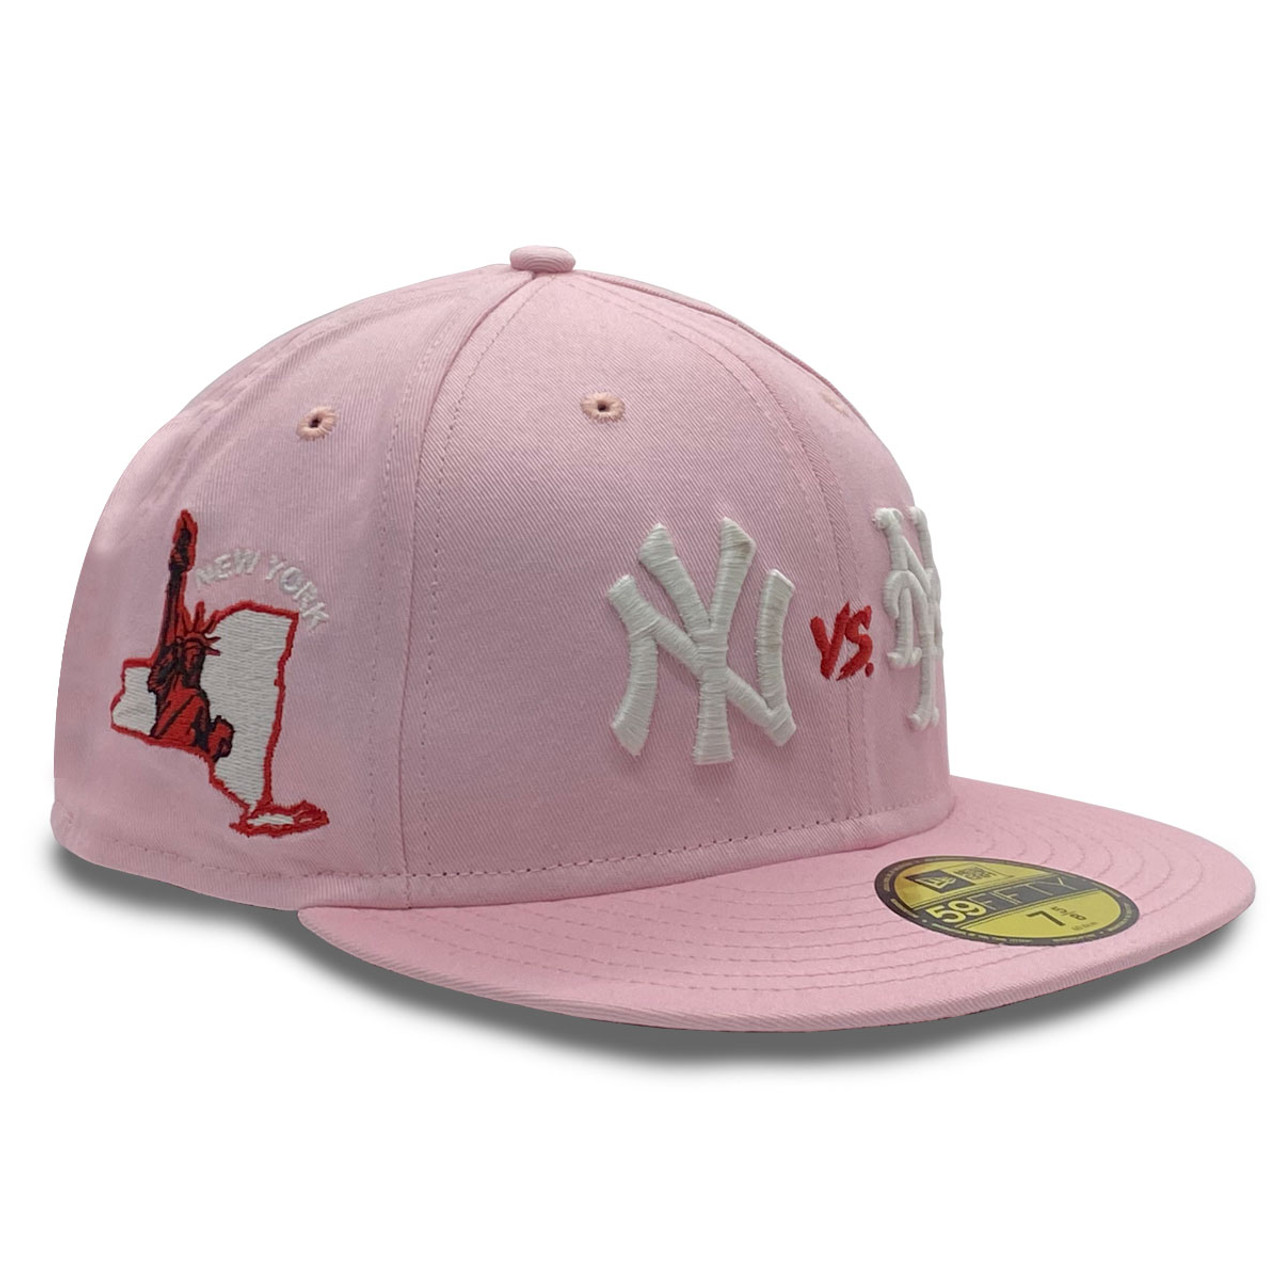 New Era New York Yankees Pink 59Fifty Fitted Hat